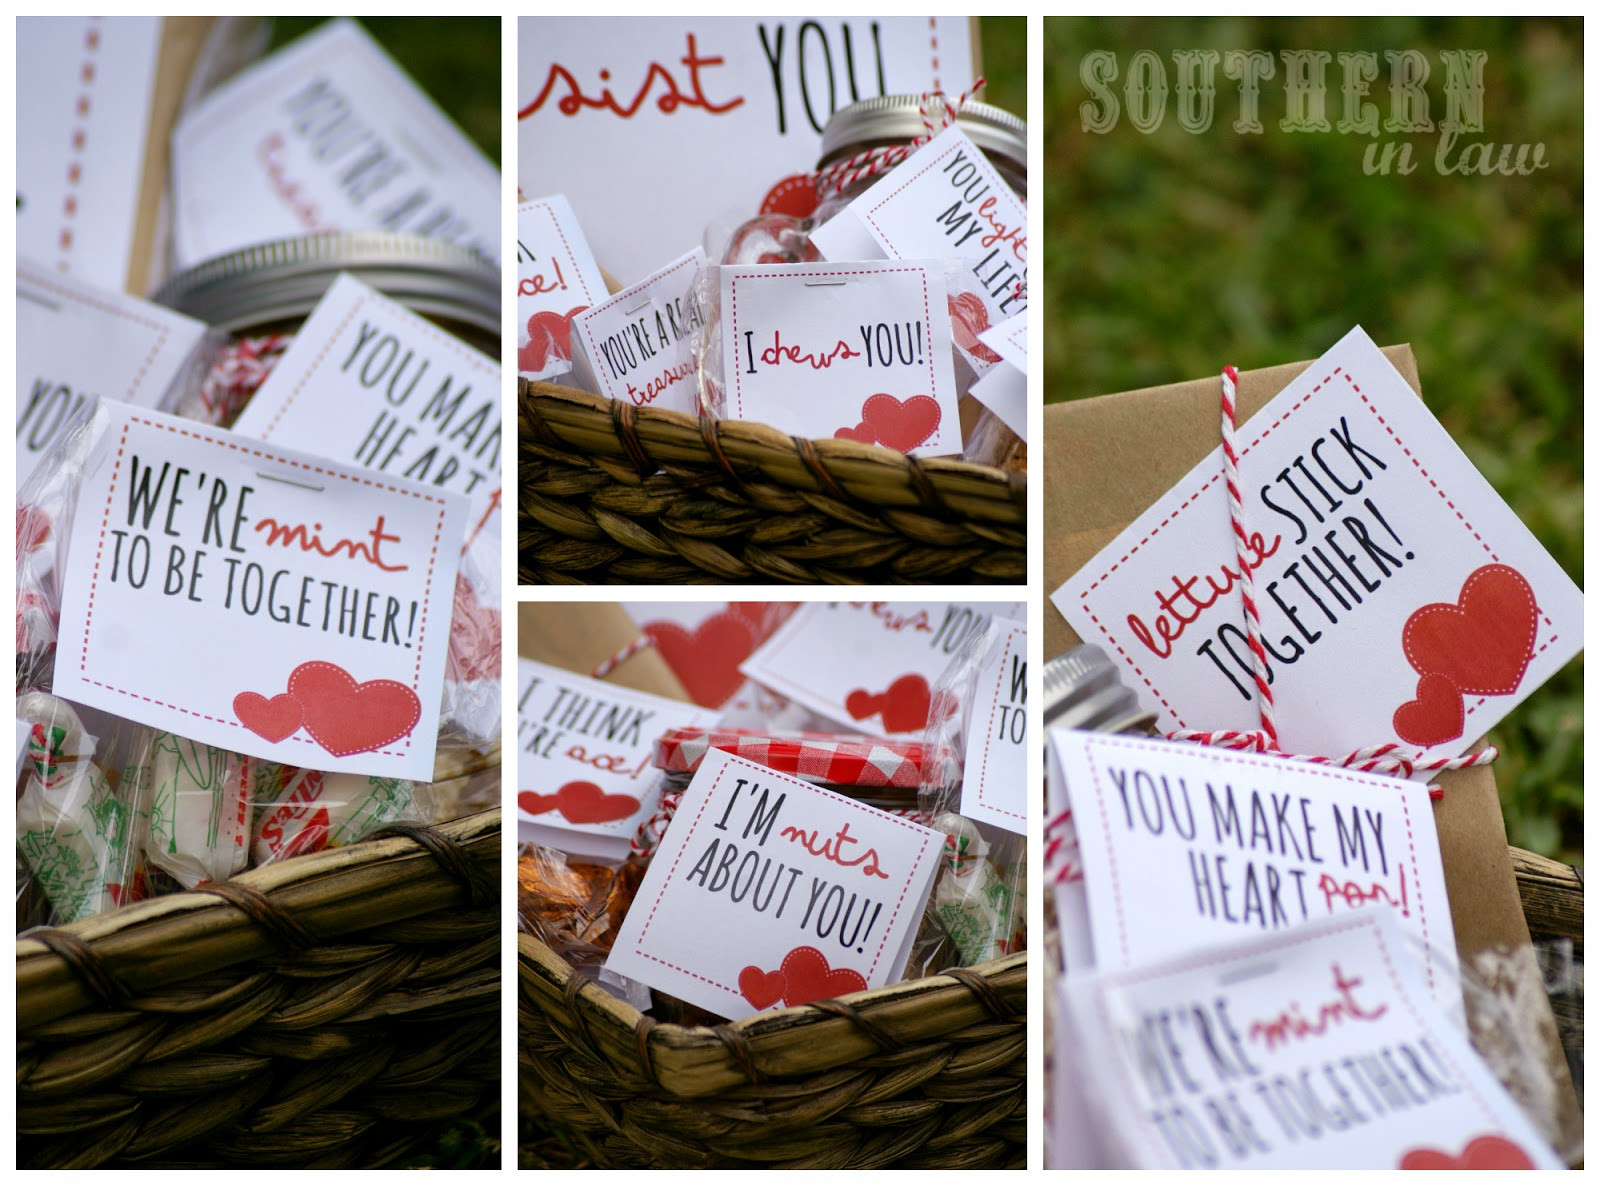 Will You Be My Valentine Gift Ideas
 Southern In Law My Punny Valentine 40 Punny Valentines